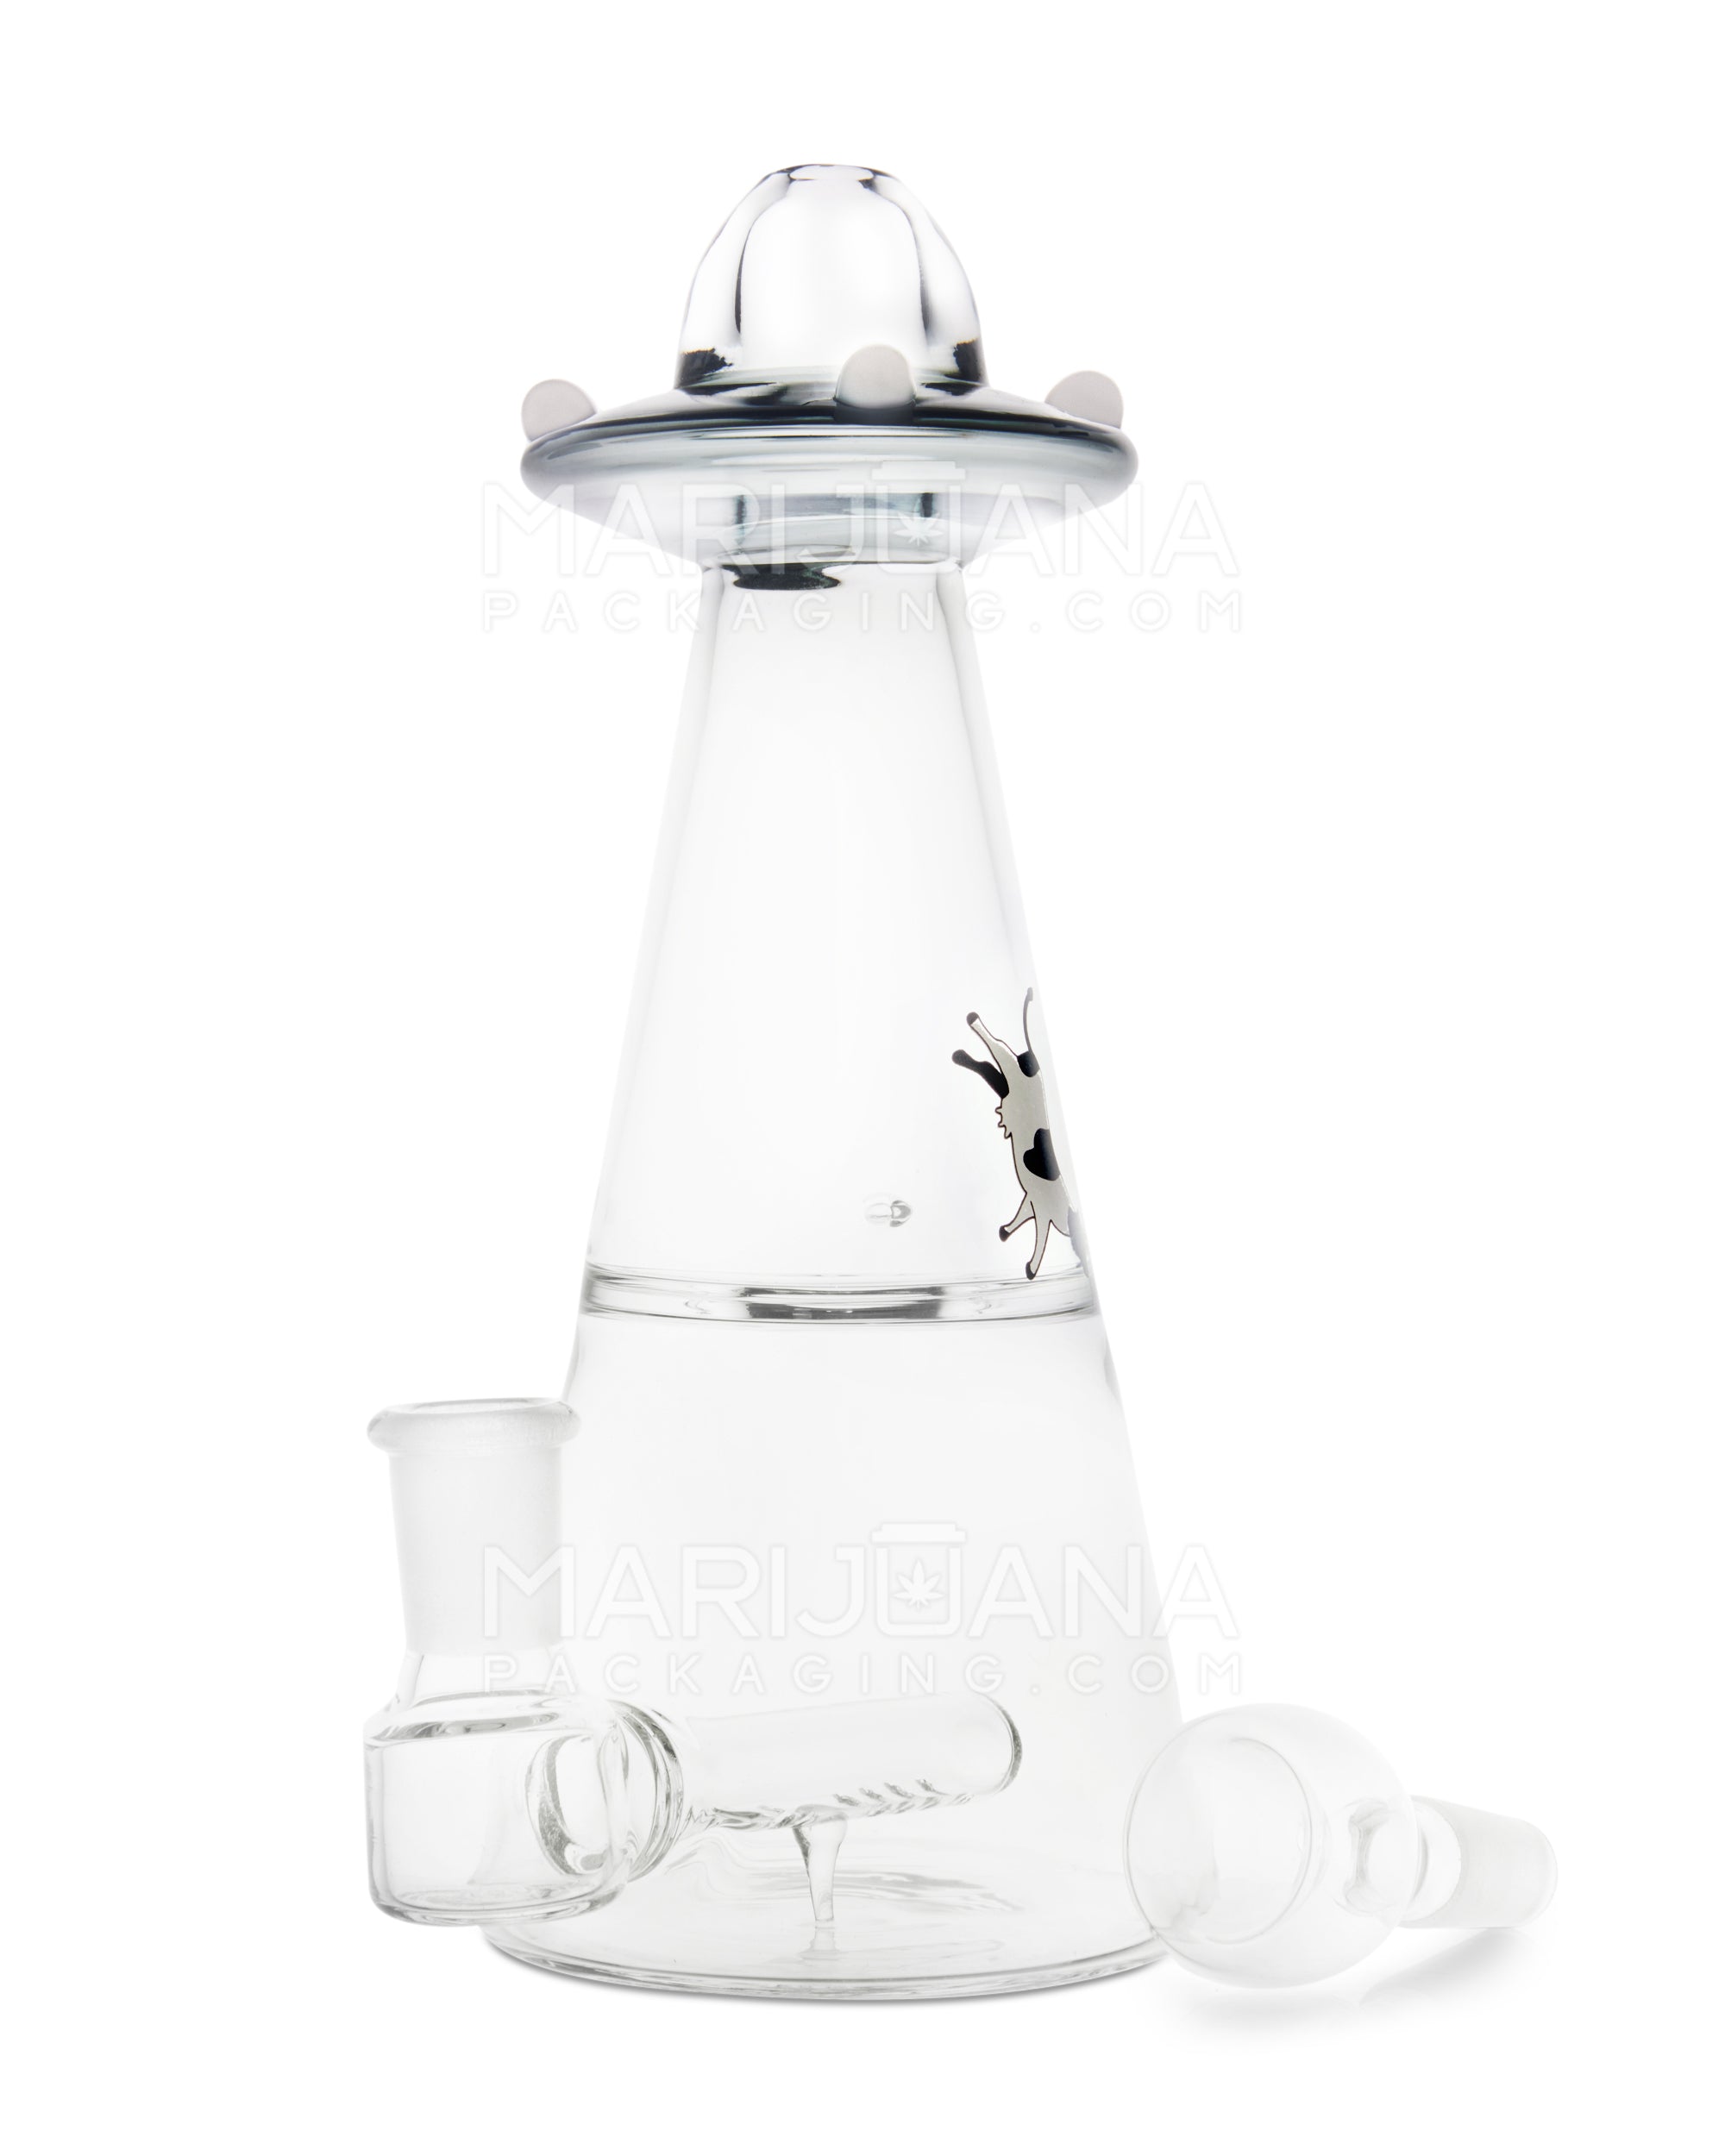 HEMPER | UFO Vortex Glass Water Pipe w/ Cow Decal | 7in Tall - 14mm Bowl - Assorted